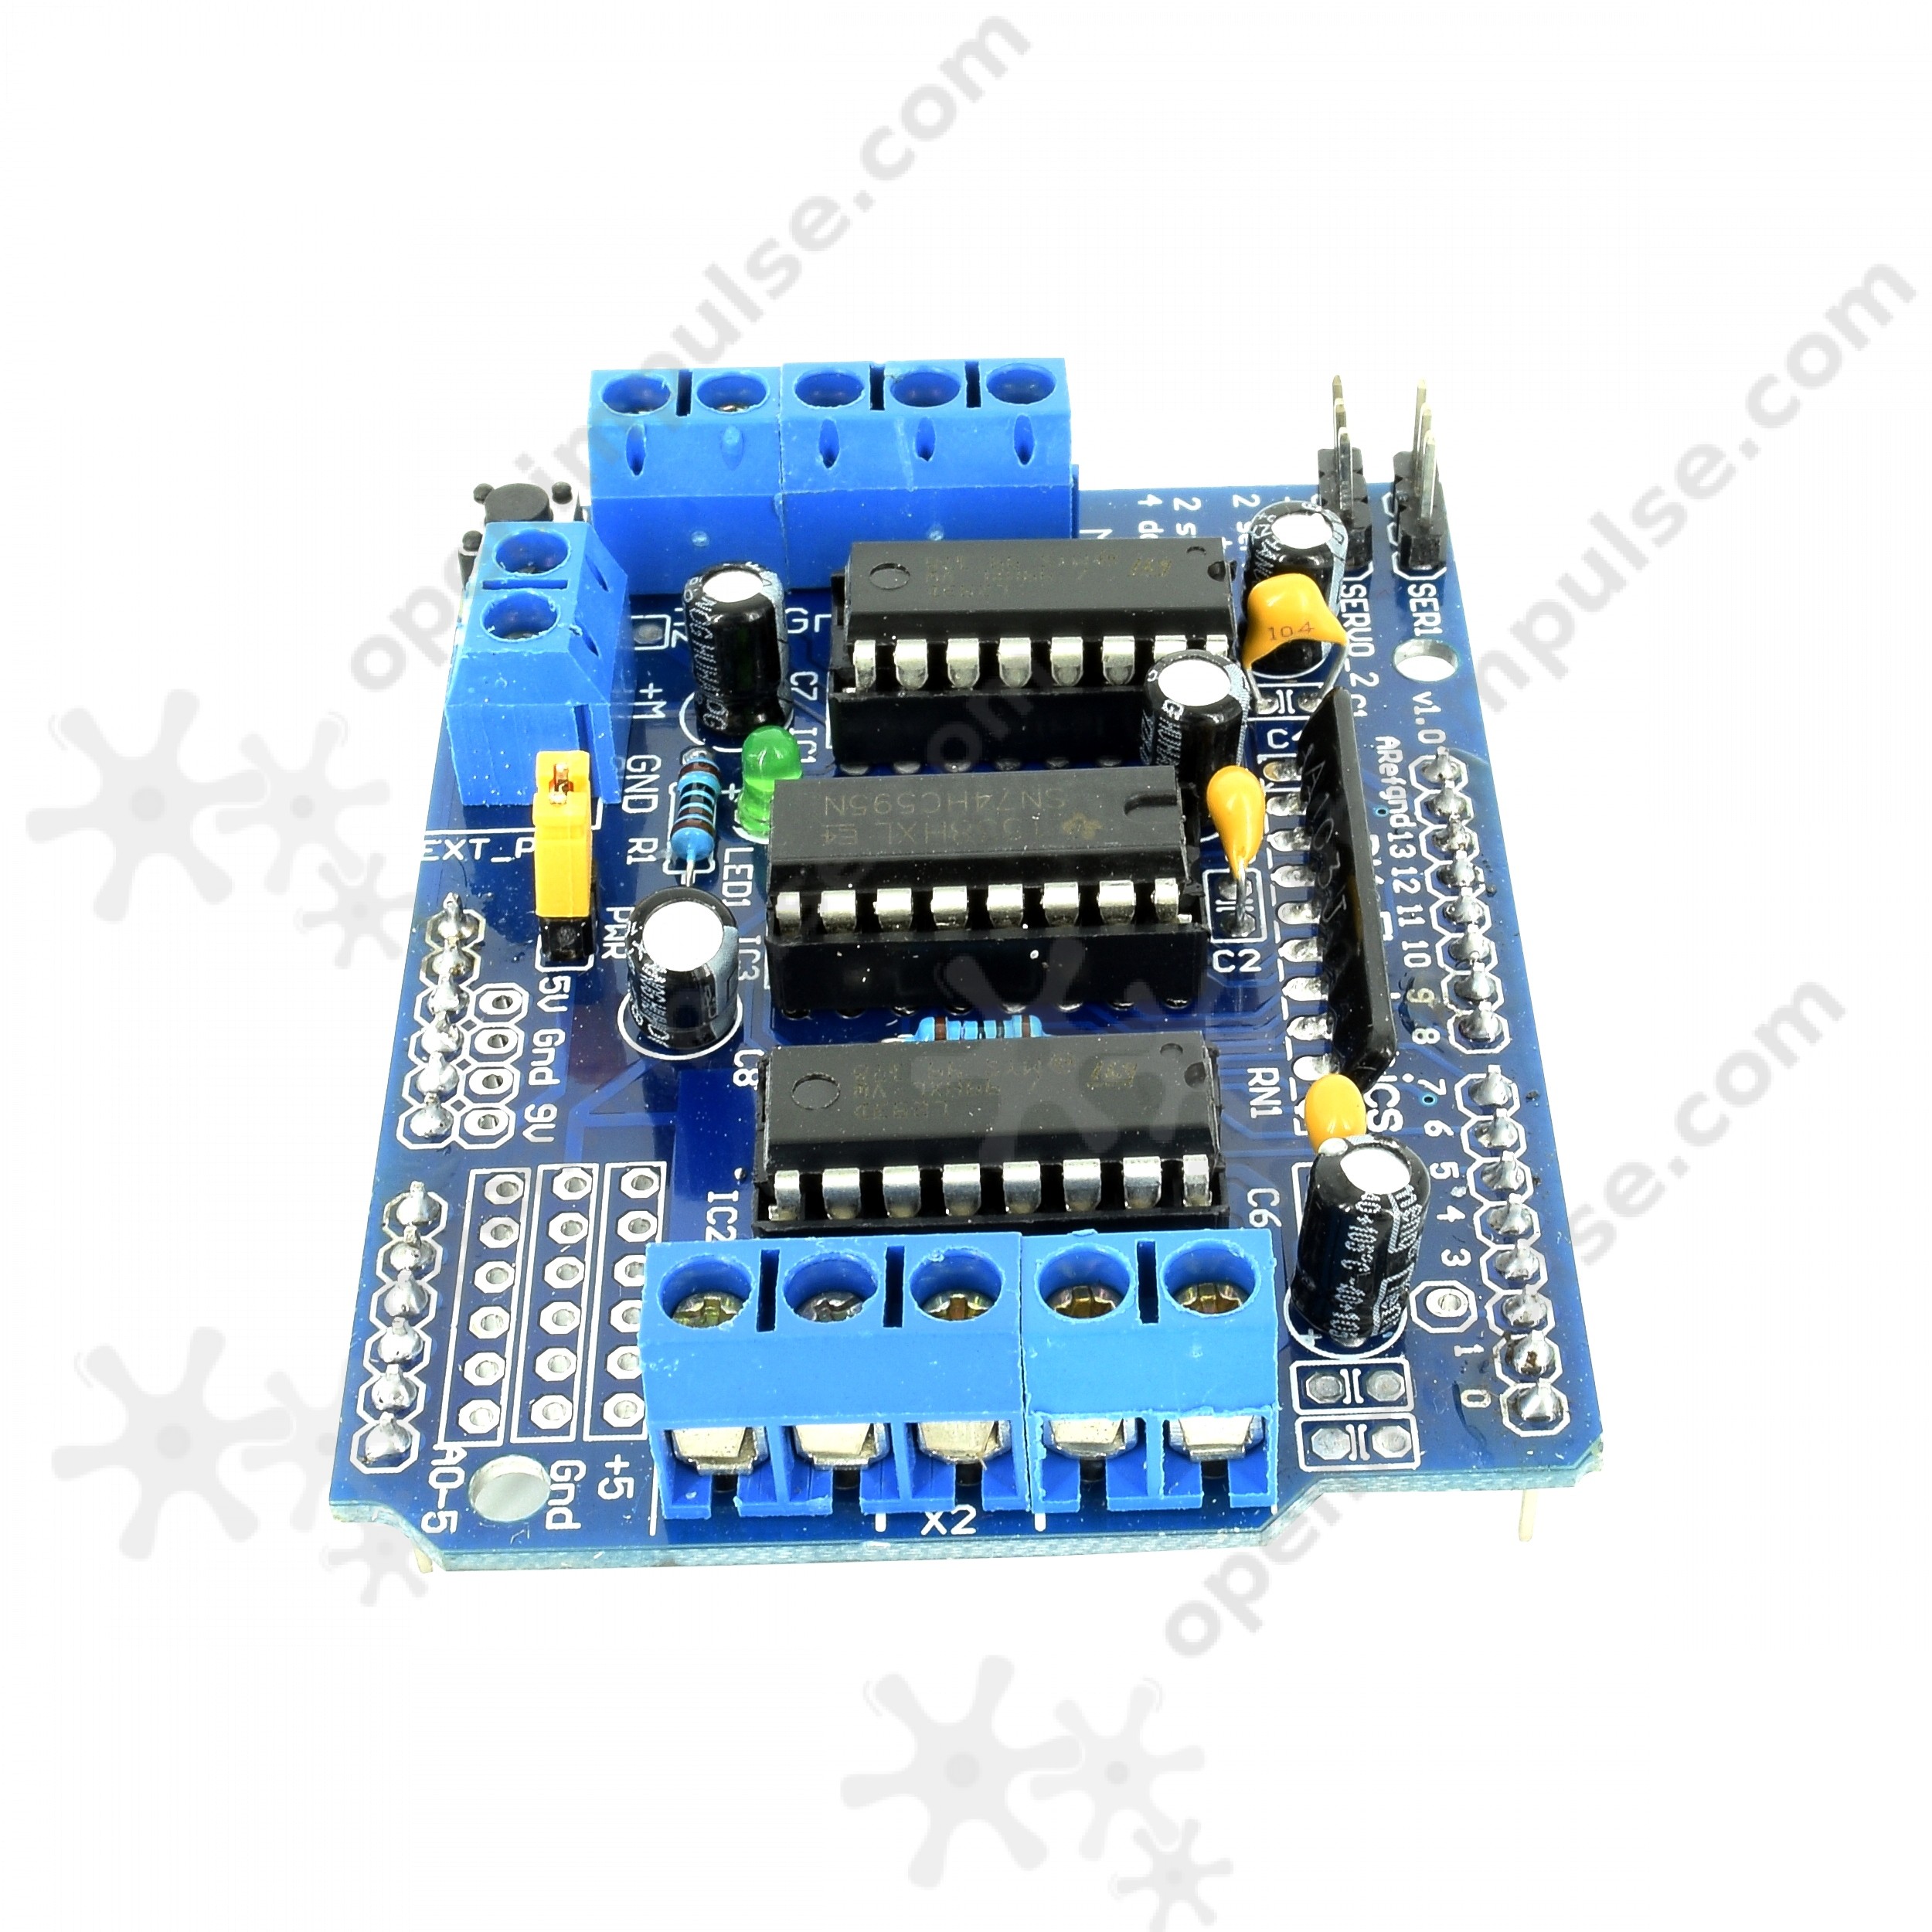 Details about   L293D Motor Control Shield Motor Drive Expansion Board Motor Shield Board *1pcs 